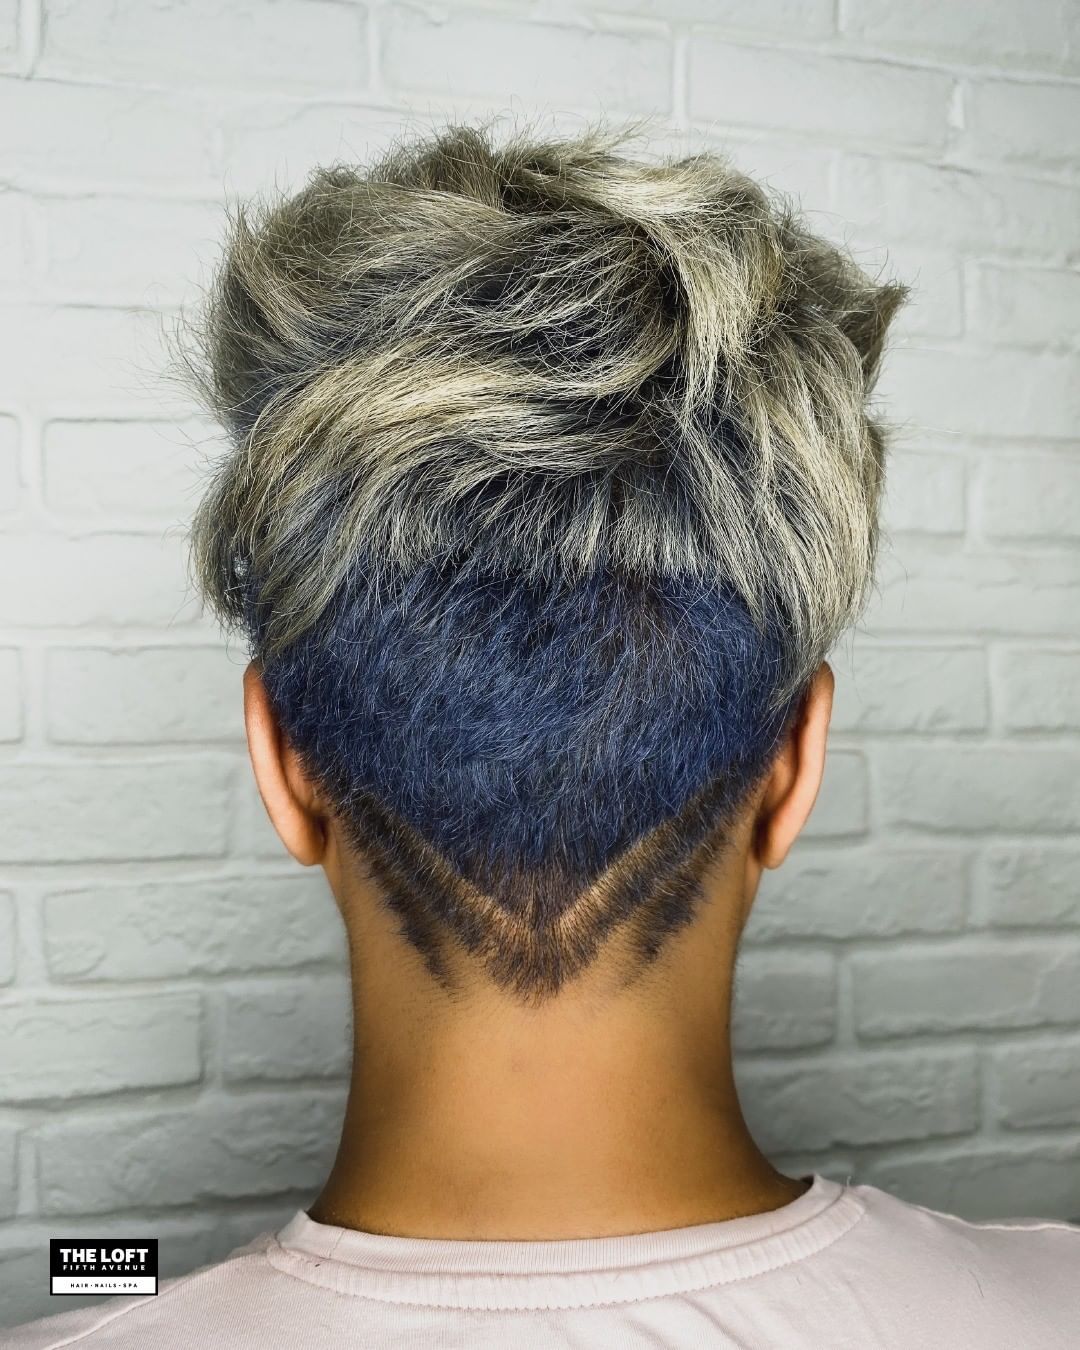 20+ Newest and Elegant Short Hairstyles For Women To Rock - Tikli